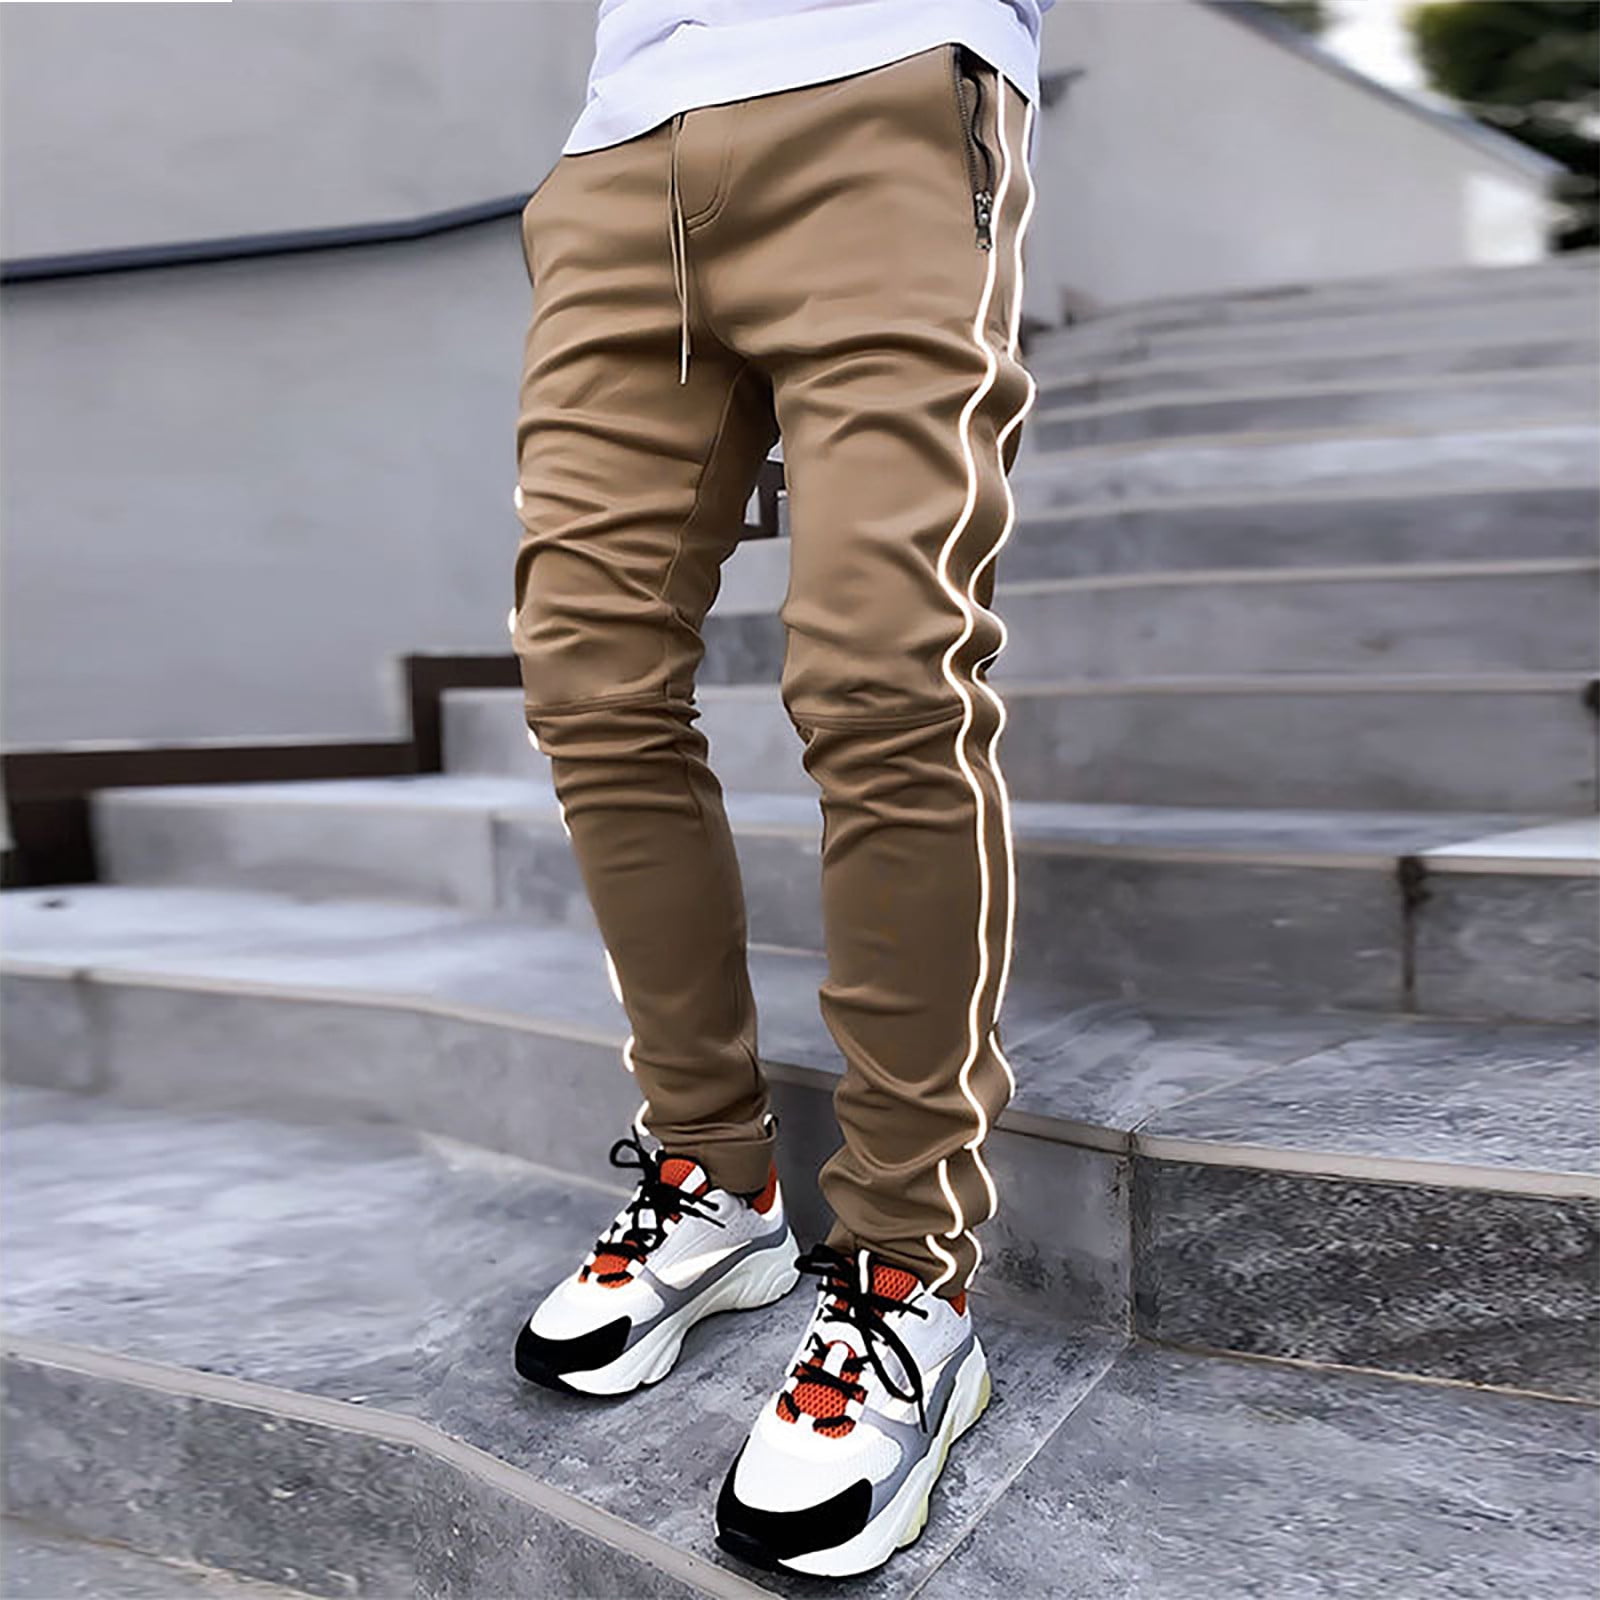 Juebong Men Cargo Pants with Multi-Pocket Cargo Men's Relaxed Pants  Trousers Drawstring Solid Cargo Pants Big & Tall,Brown,XXXL